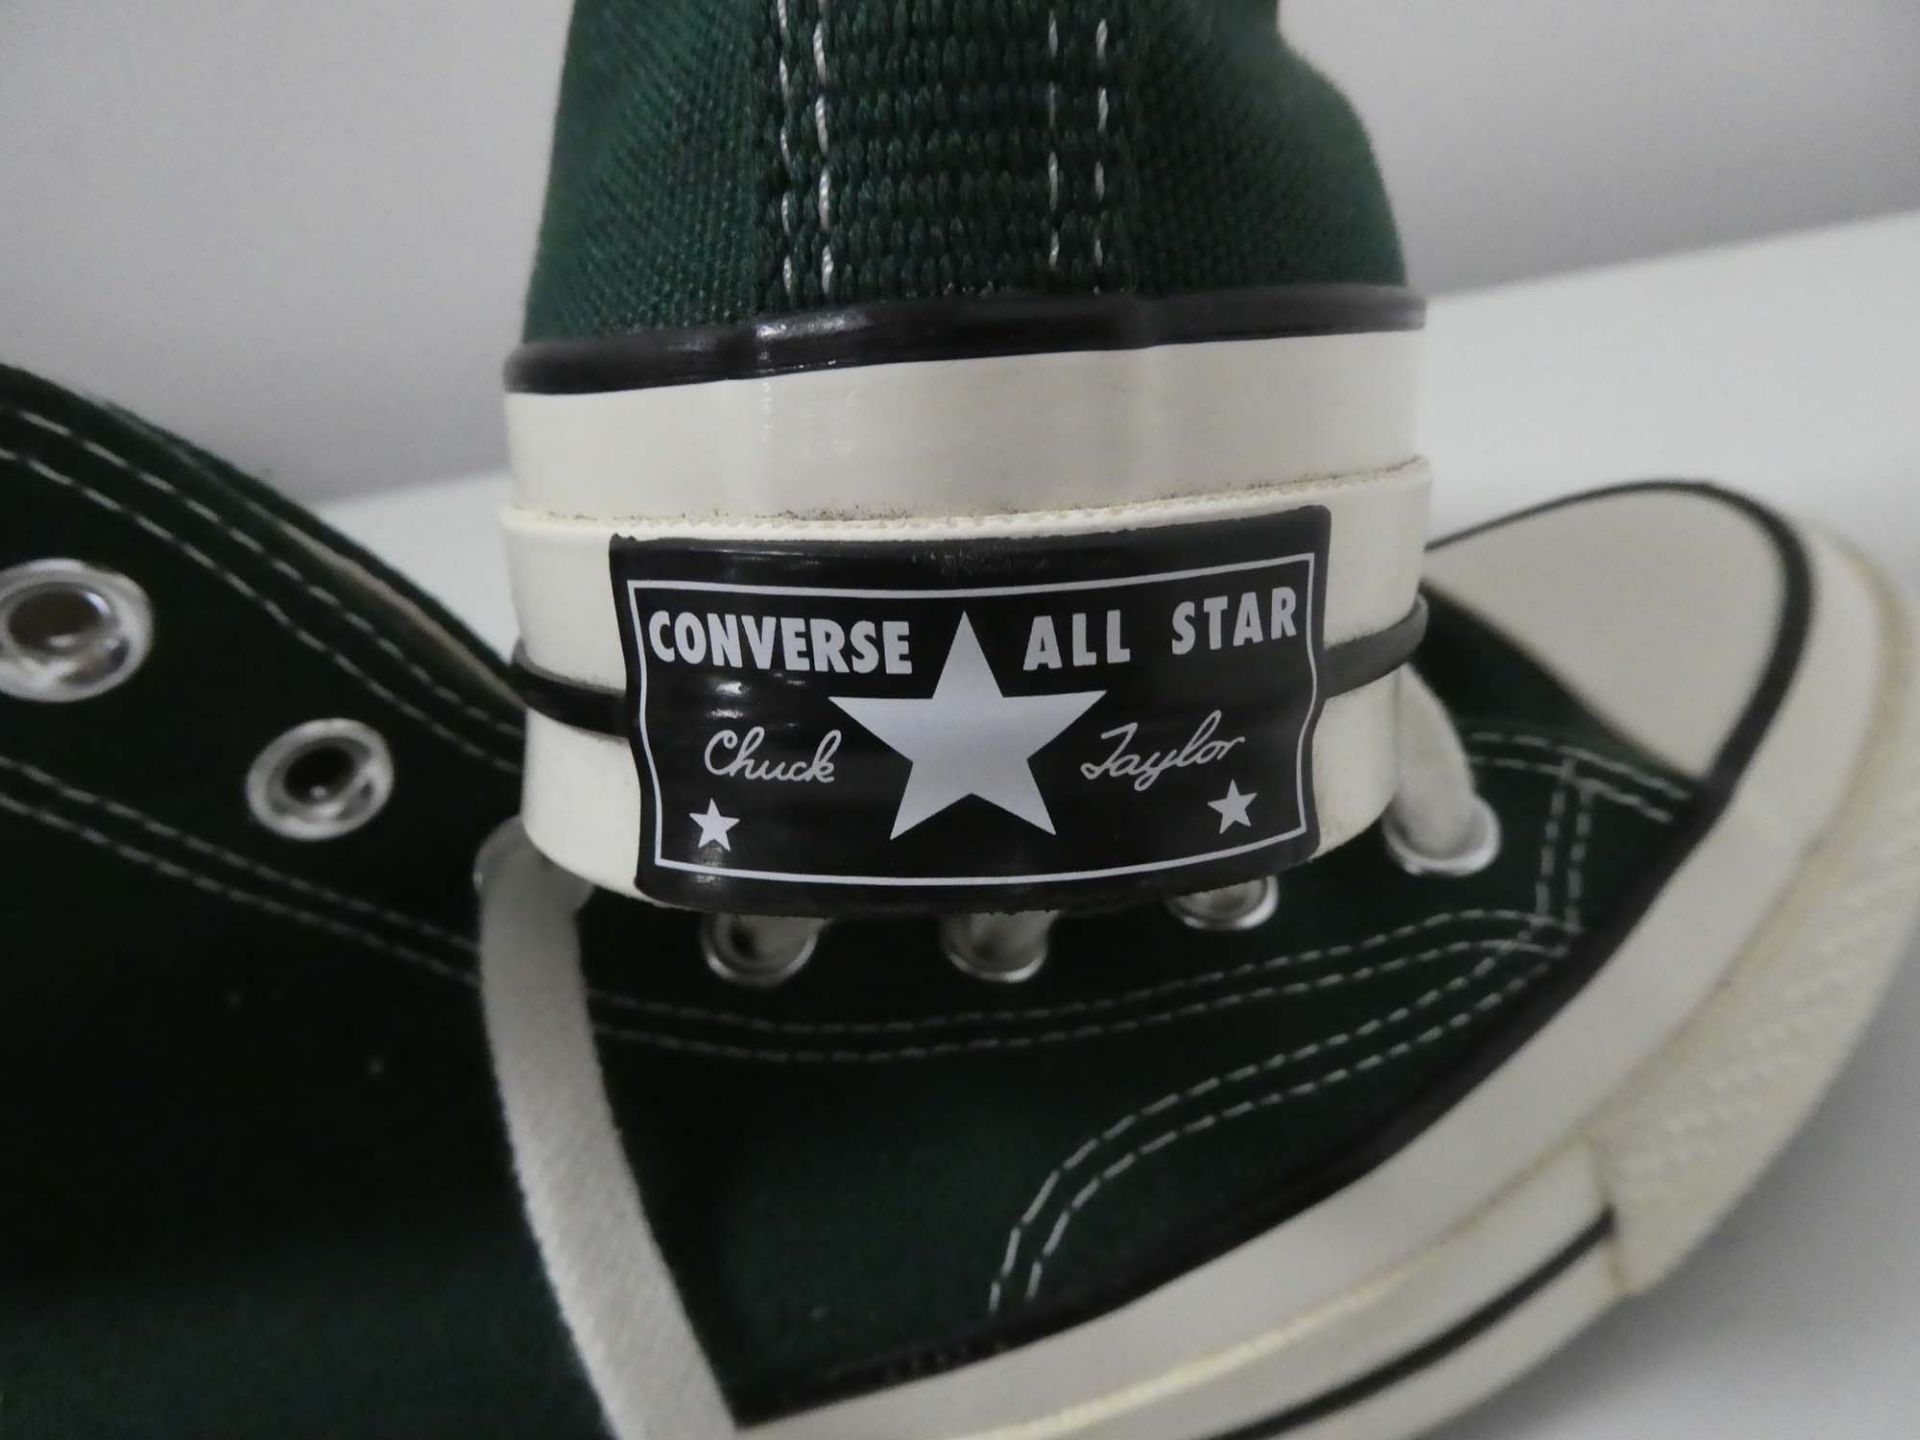 Converse All Star chuck taylor high tops in dark green size 6 - Image 3 of 4